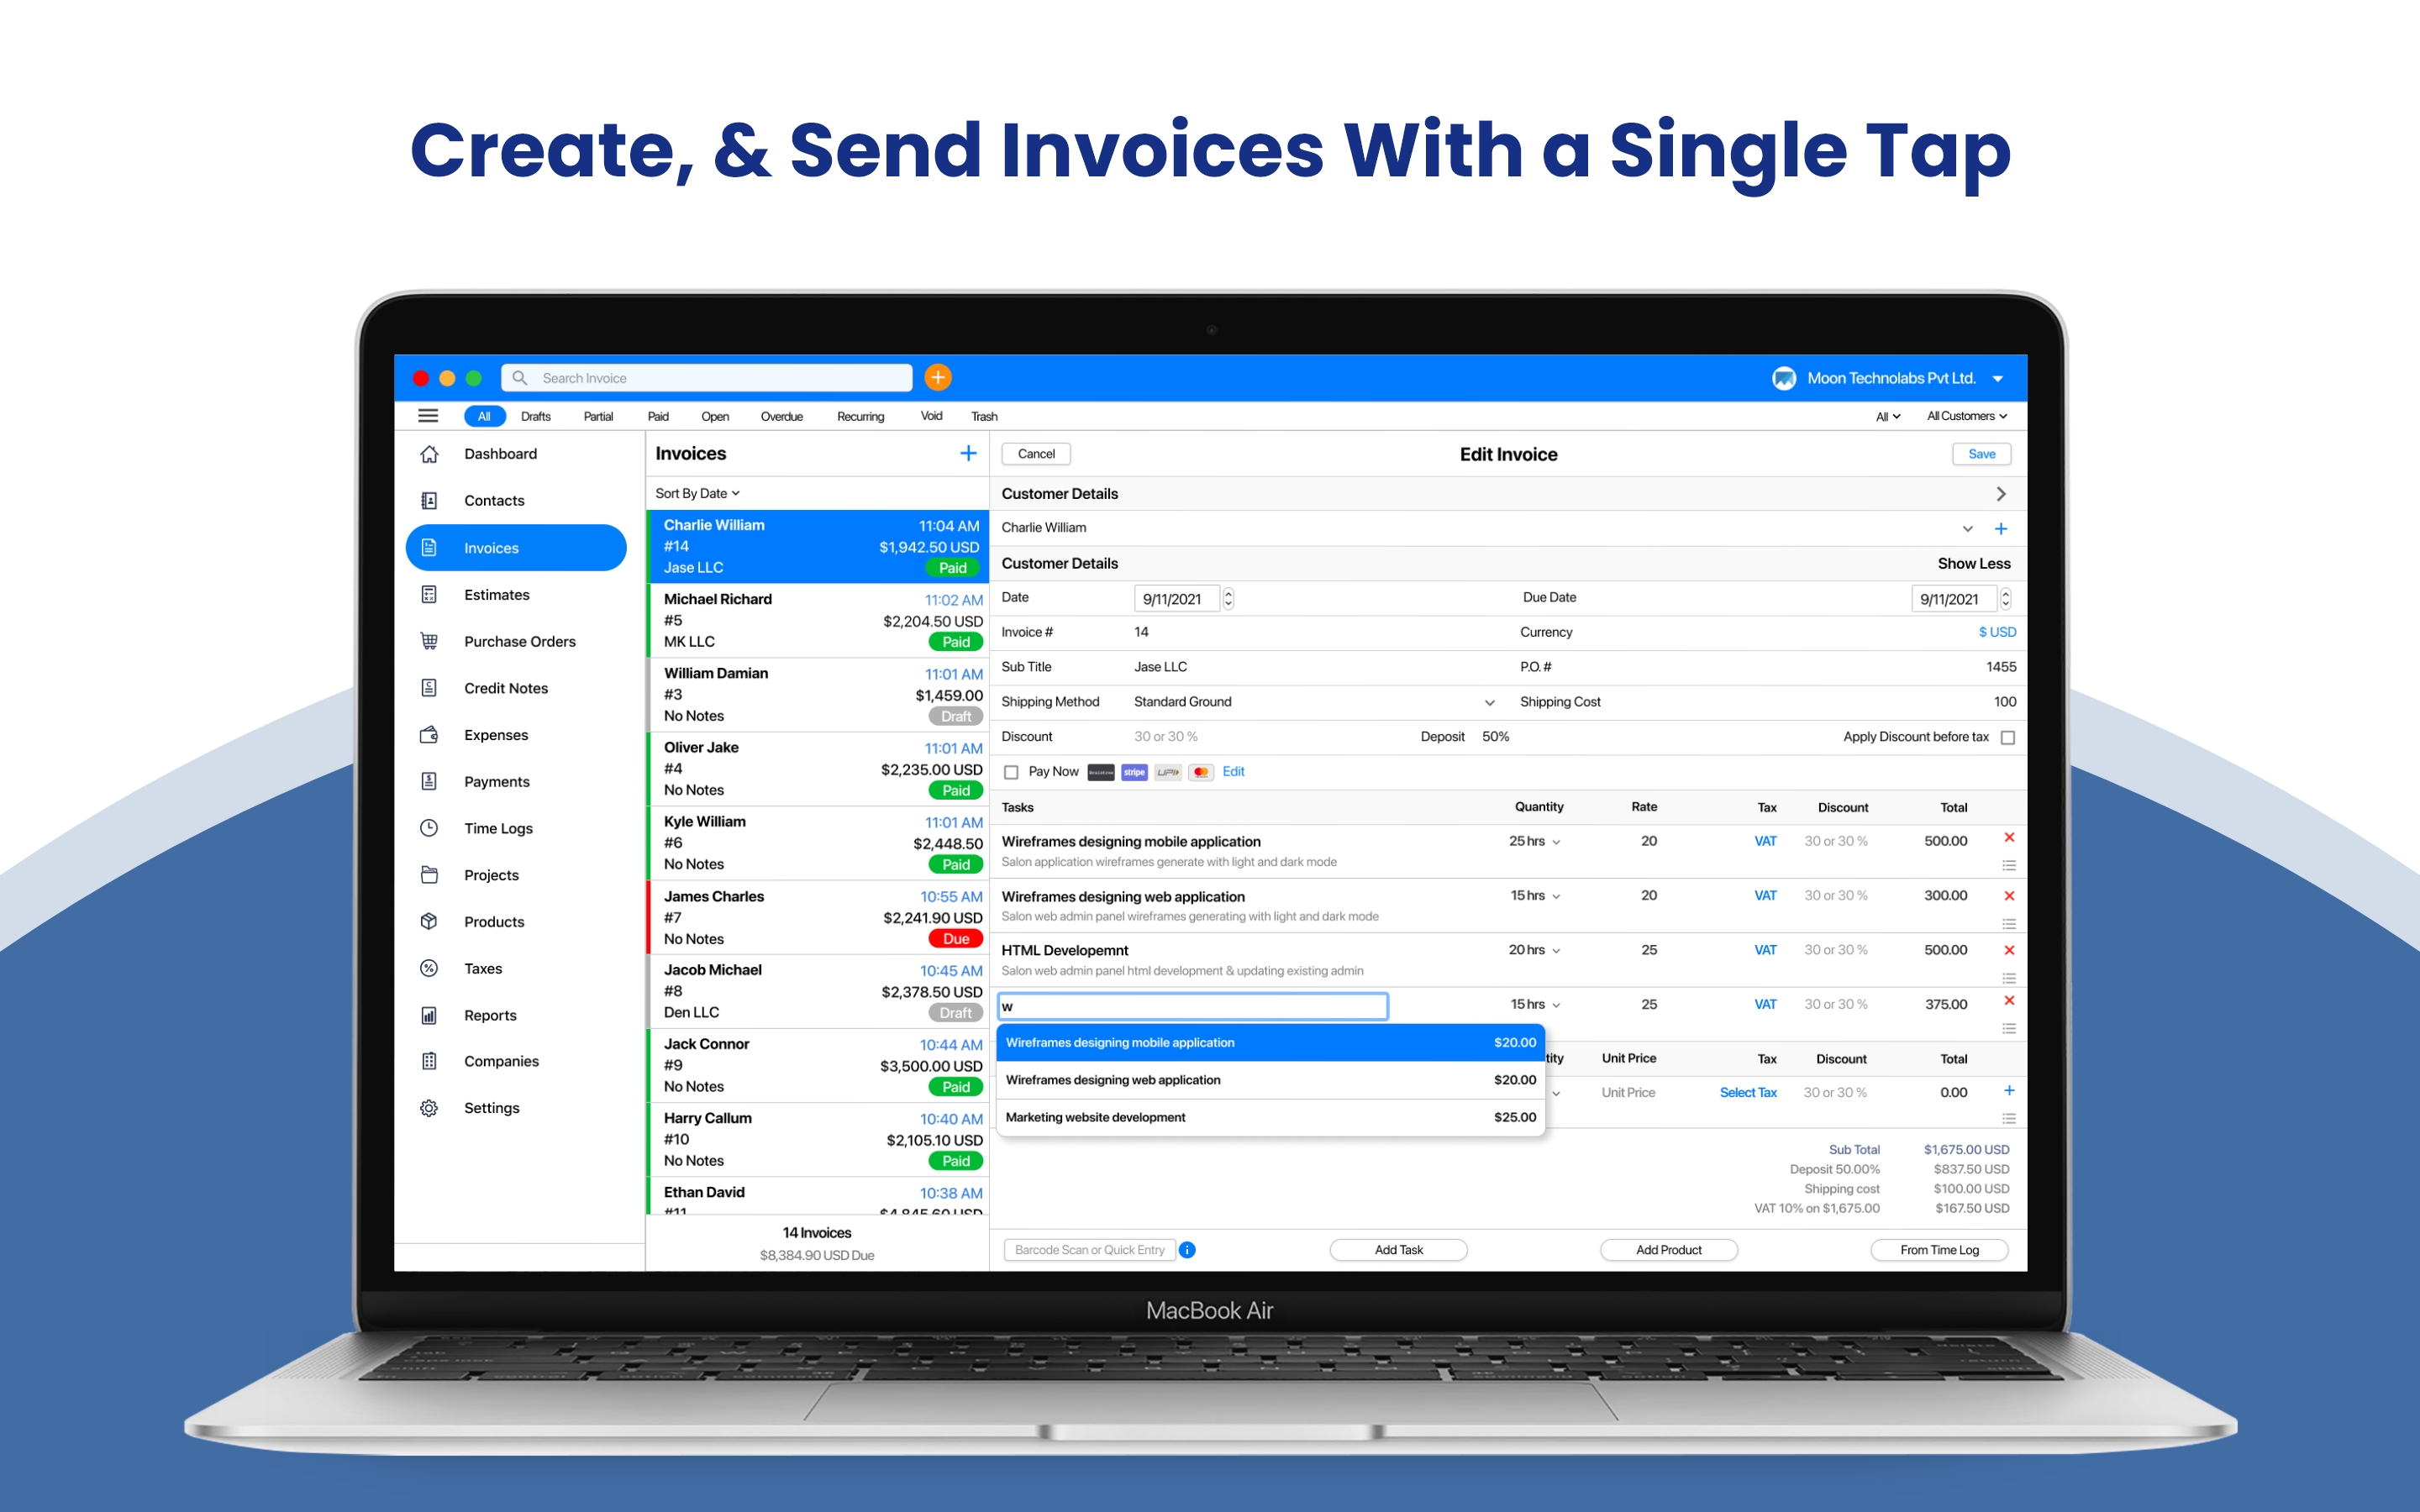 Create, & Send Invoices With a Single Tap